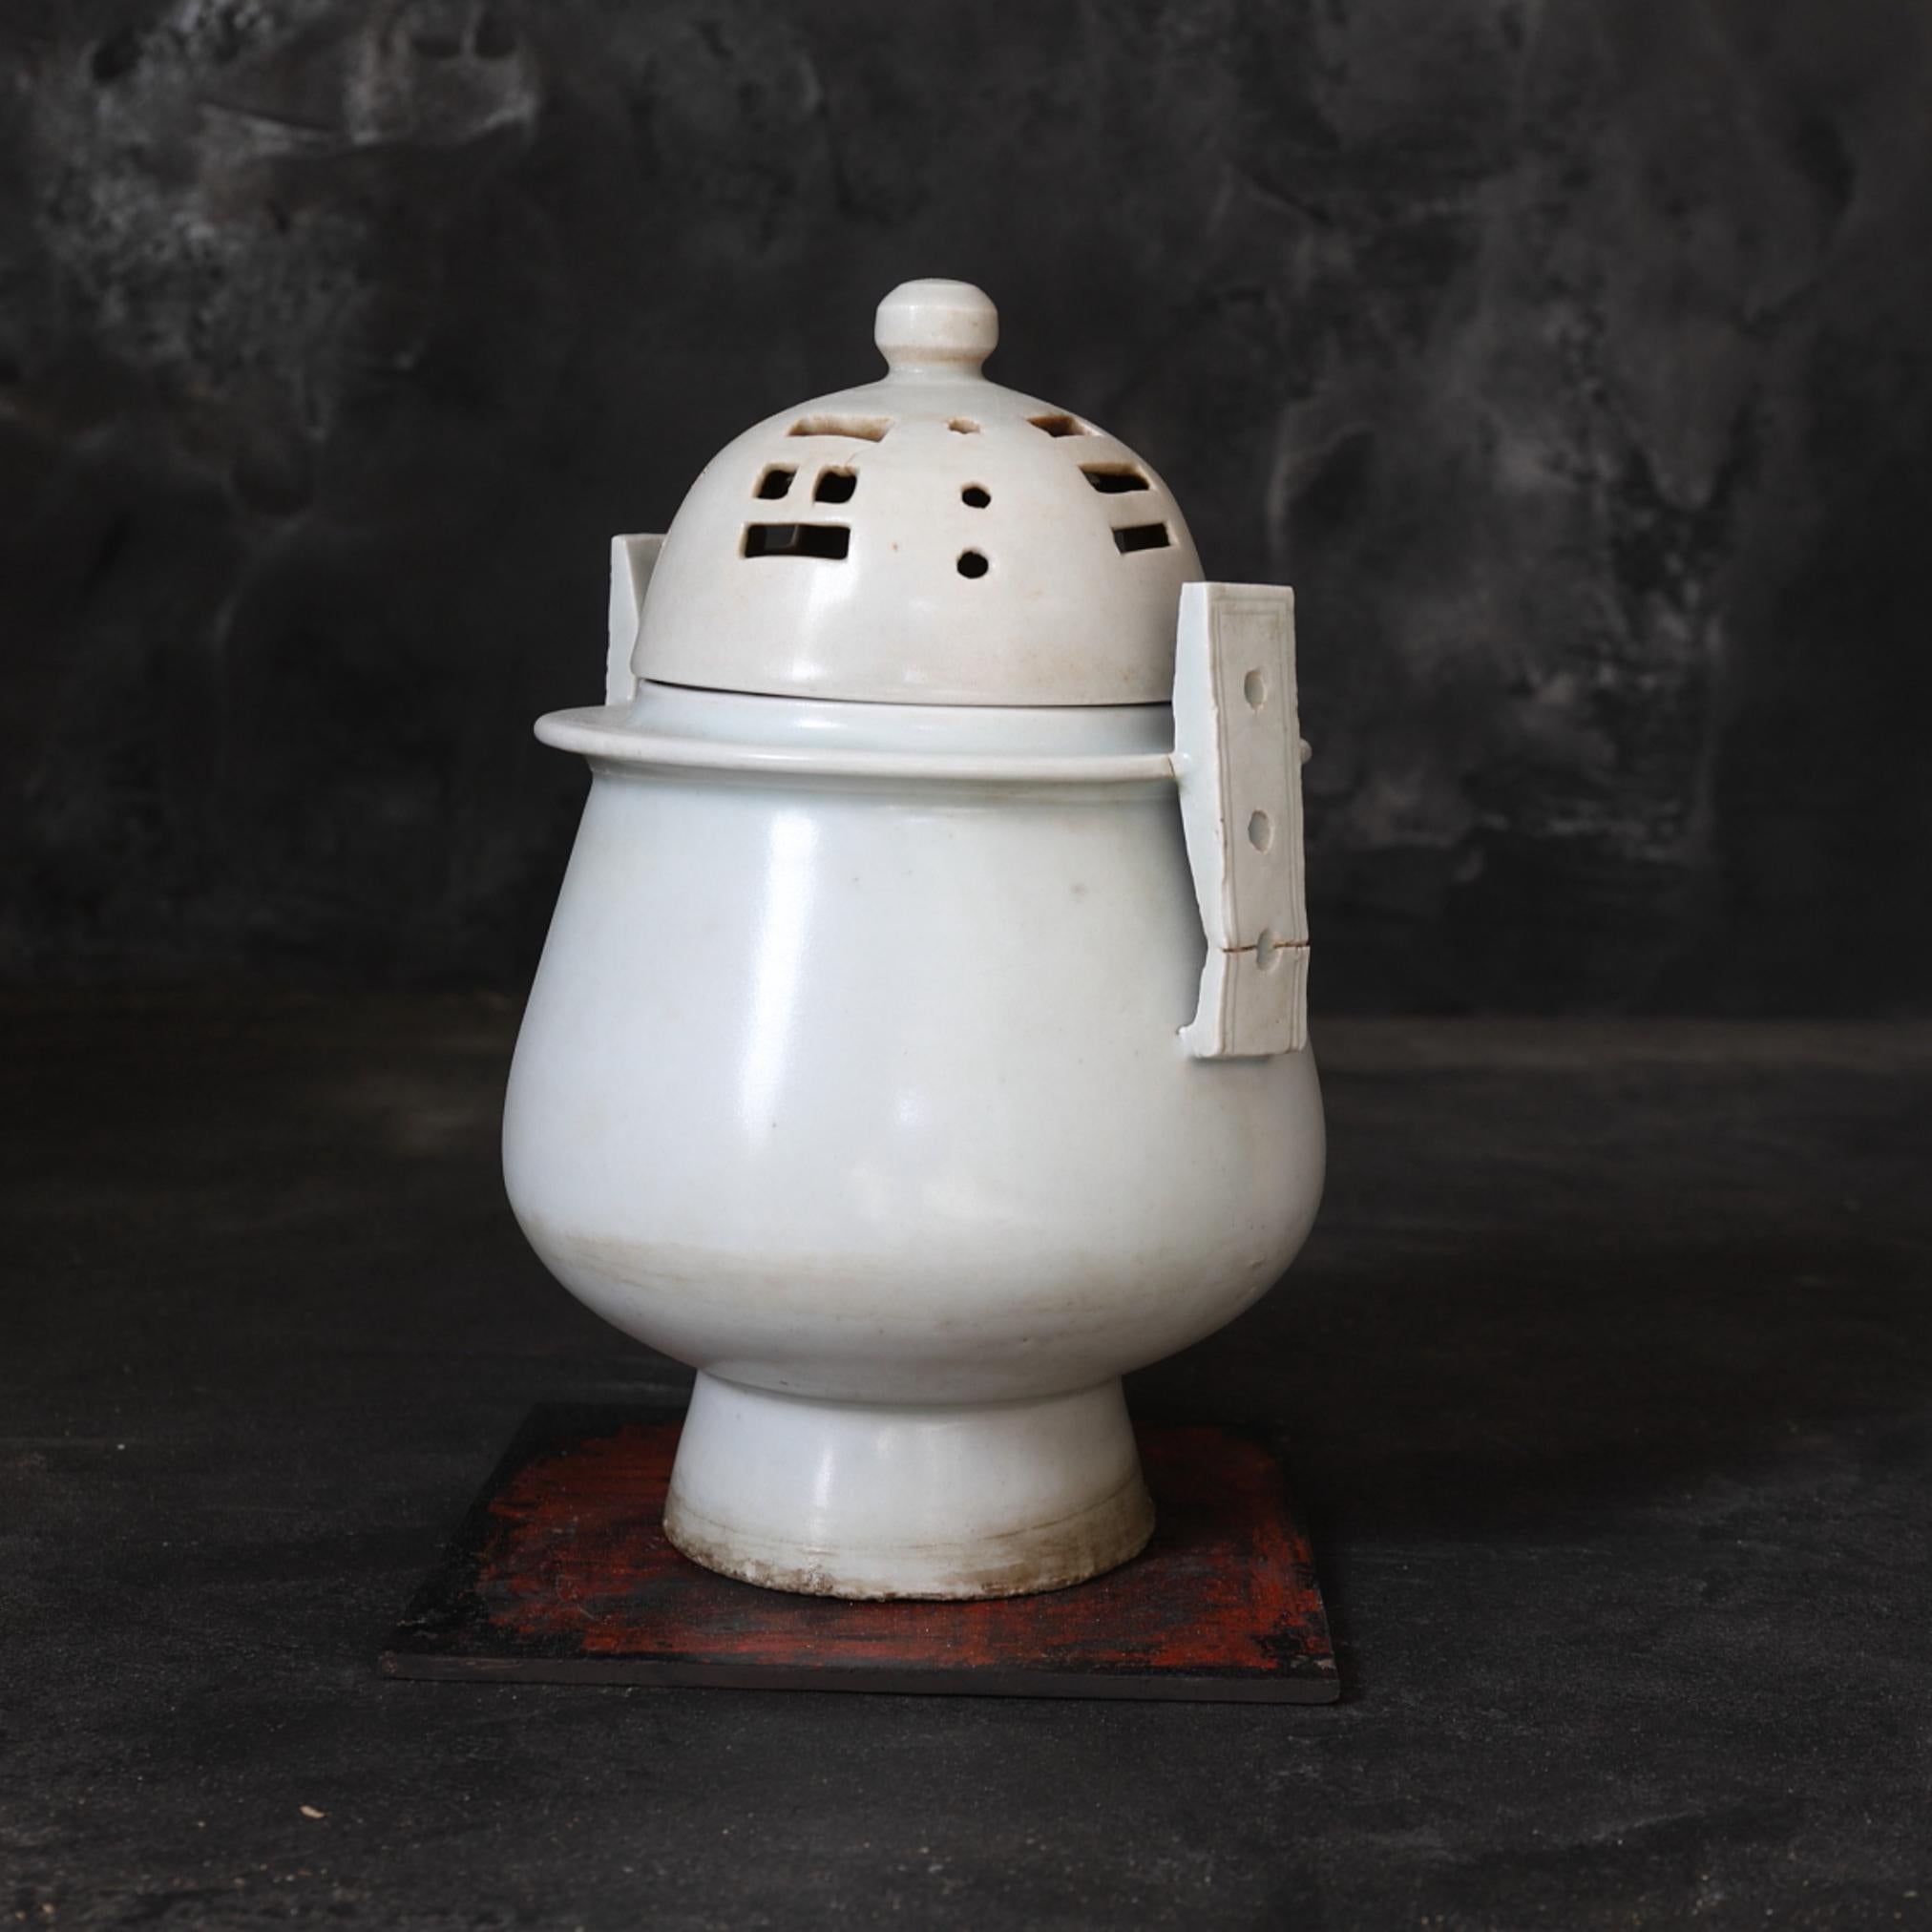 This incense burner presents the characteristics of a typical Yi Dynasty Joseon Dynasty incense burner with a body that rises smoothly from the base, openworked ears and a semi-circular lid.

The white porcelain is baked well, and the rustic white